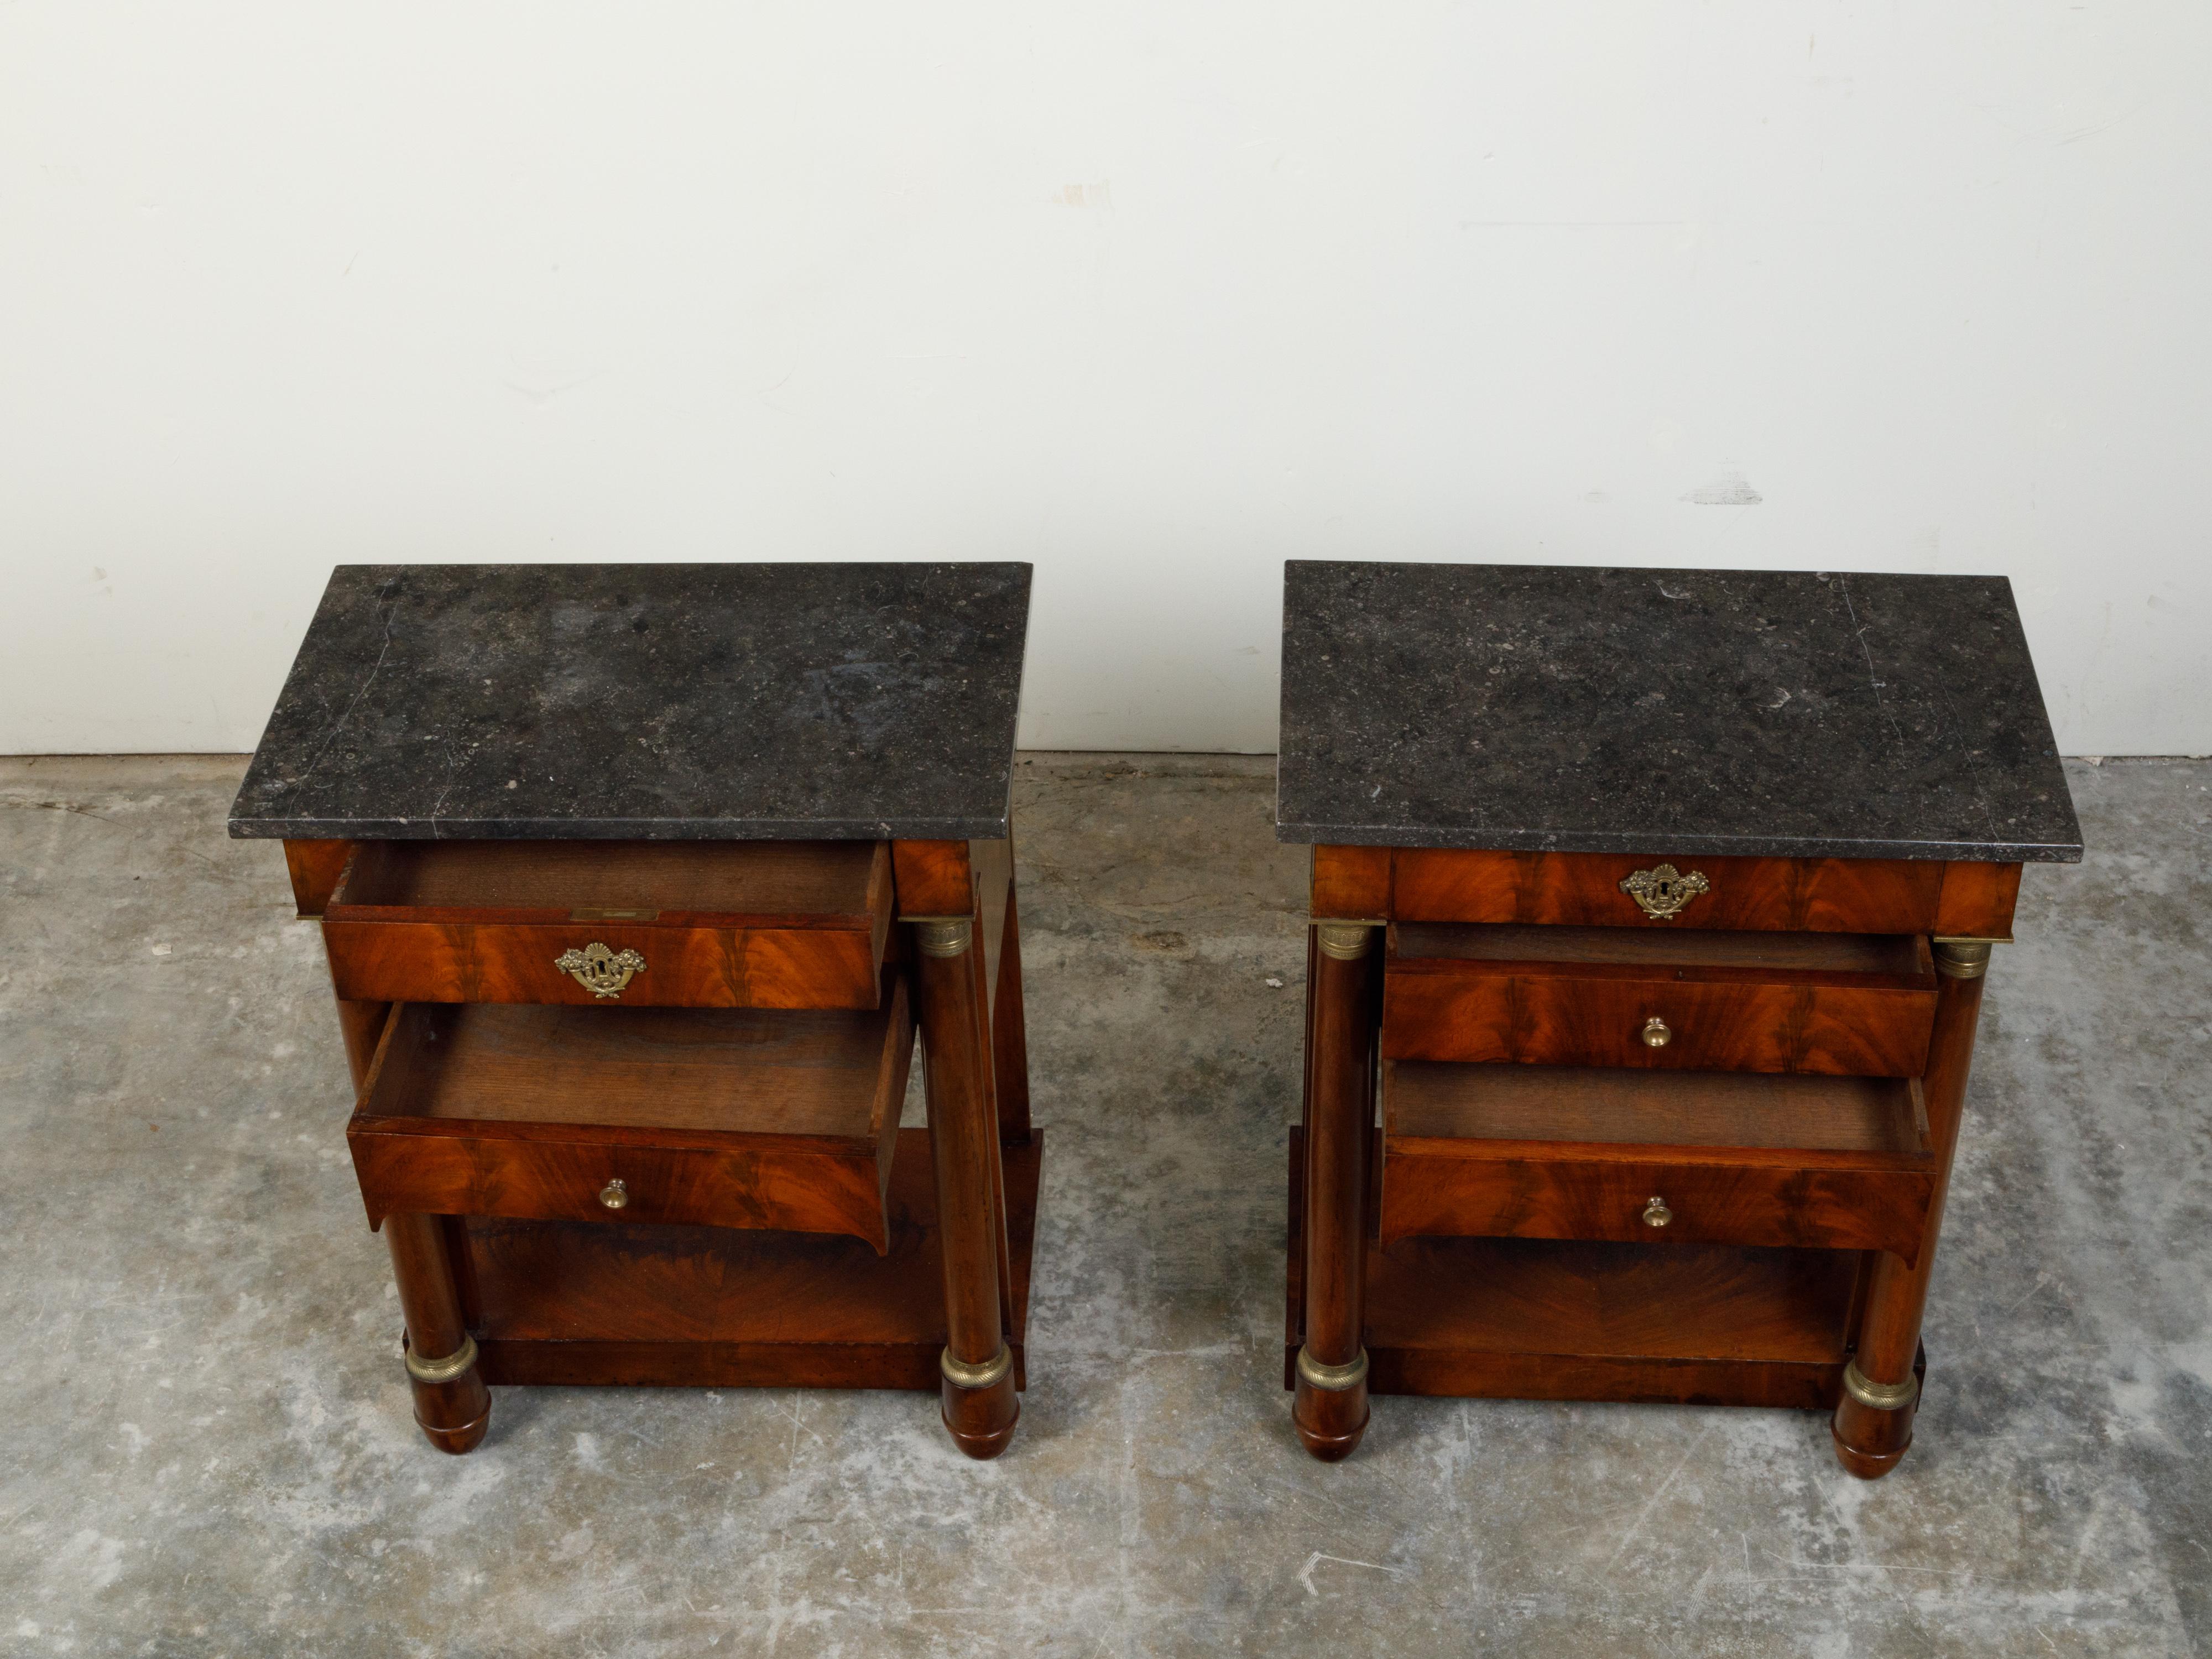 French Empire Early 19th Century Walnut Console Tables with Grey Marble Tops For Sale 3